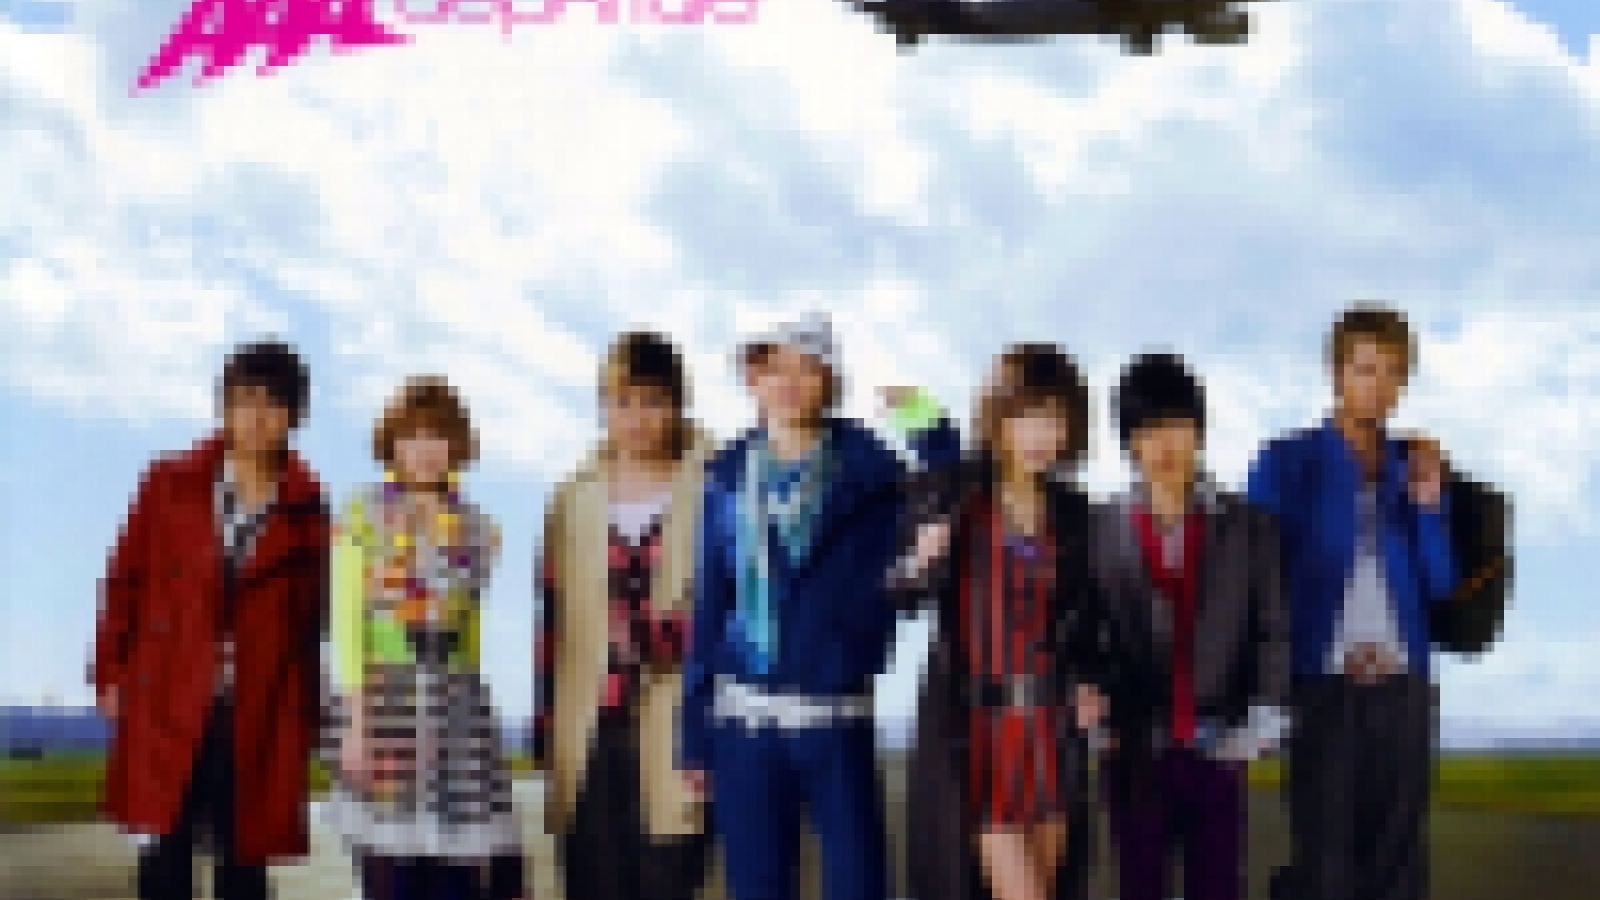 AAA - depArture © Morning Musume. - JaME - Didier CABOCHE